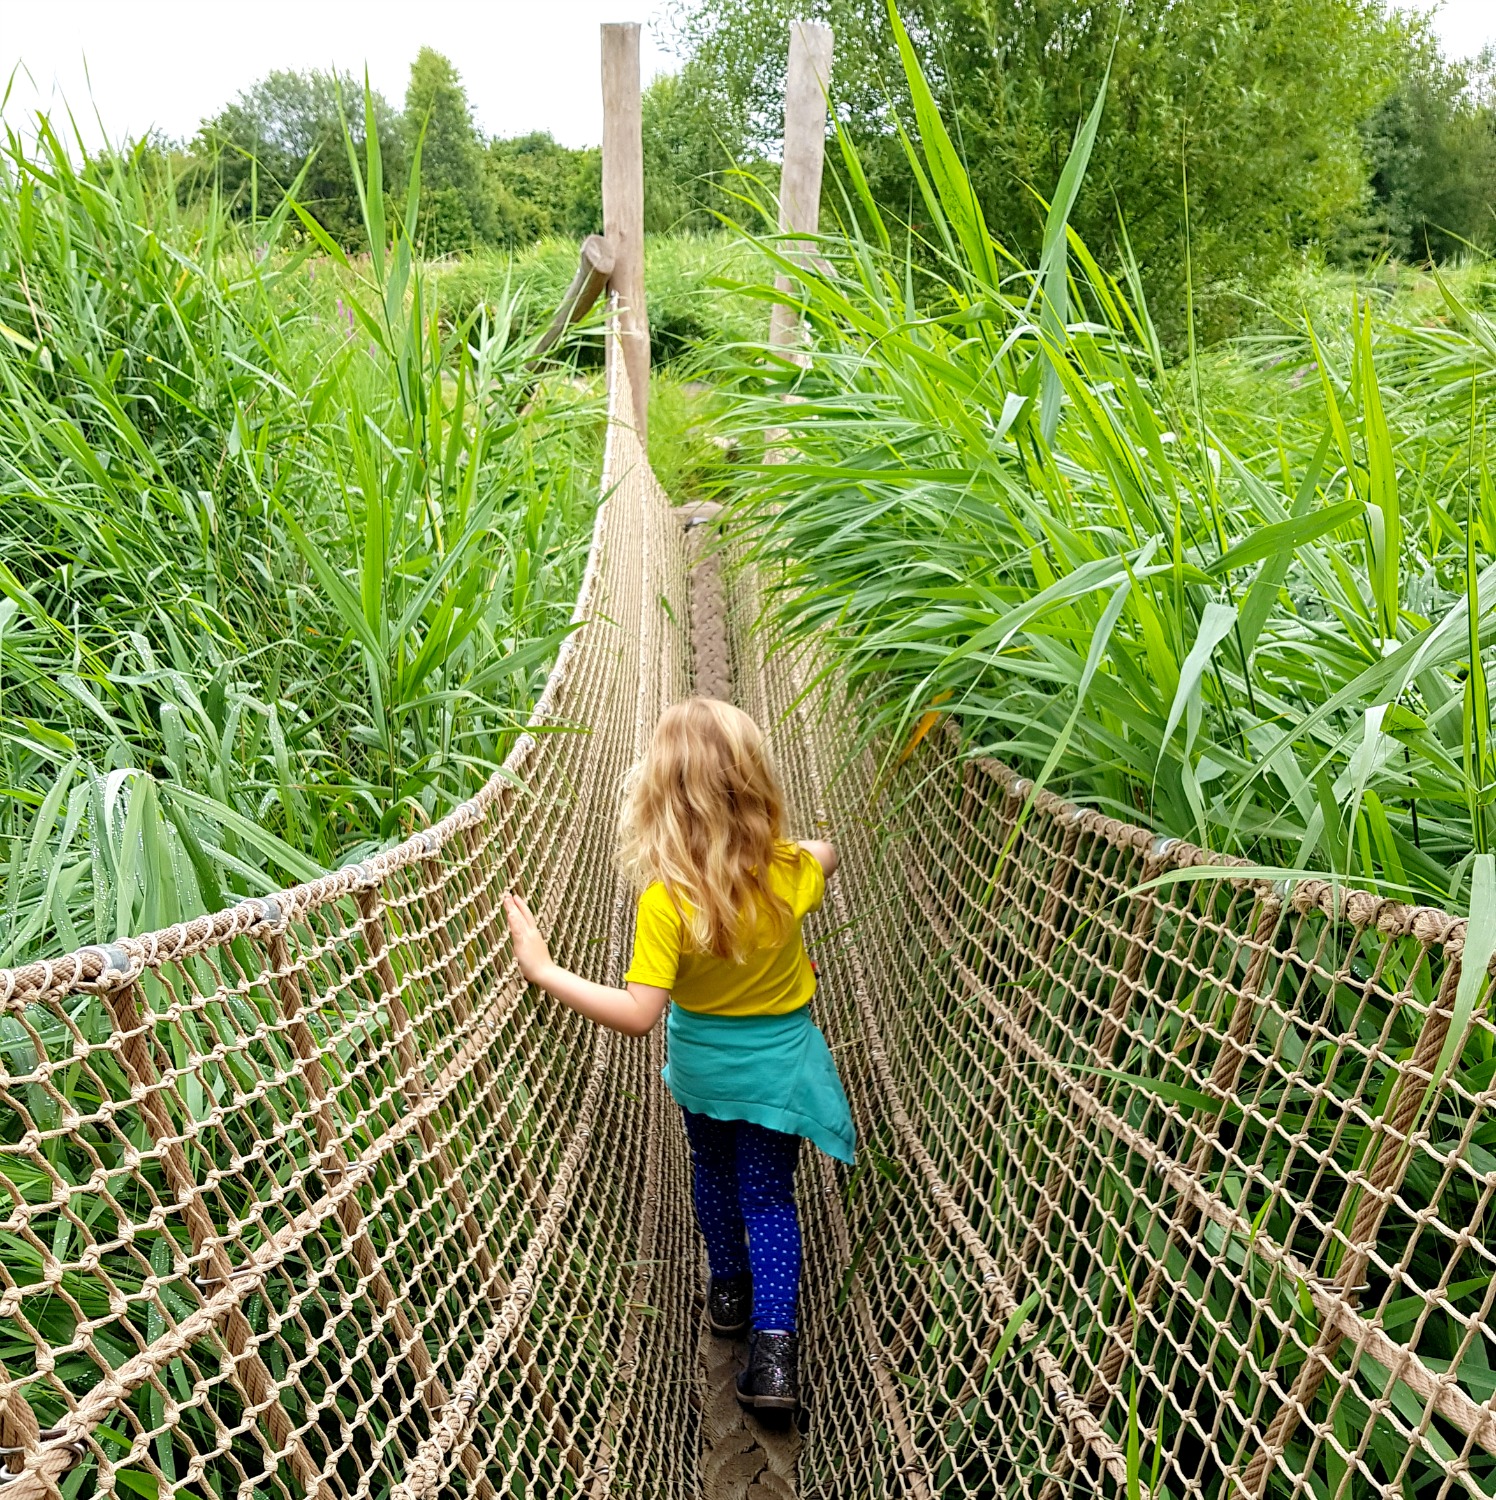 My daughter walks across the wild walk ropes course at the London Wetland Centre in Barnes, one of the best places to get outdoors in London with kids